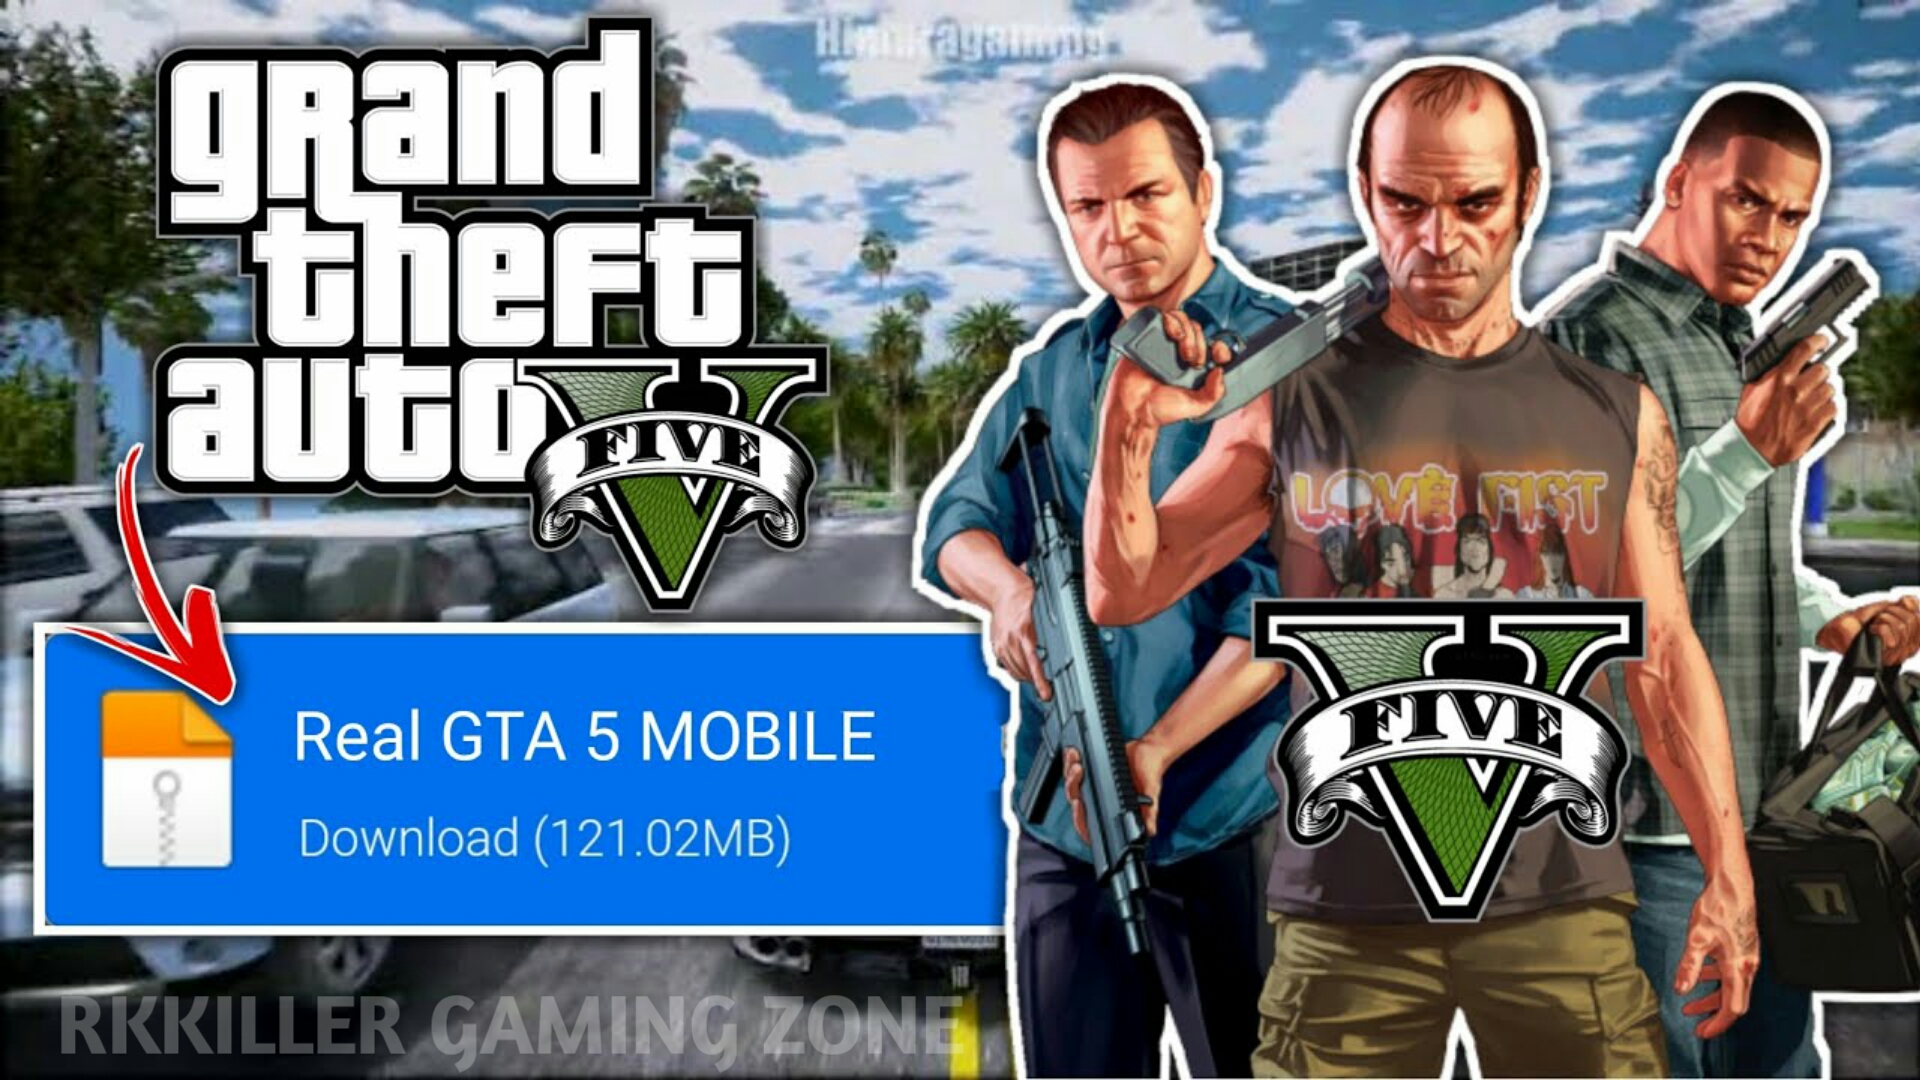 Rkkiller Gaming Zone: How to download GTA 5 in android